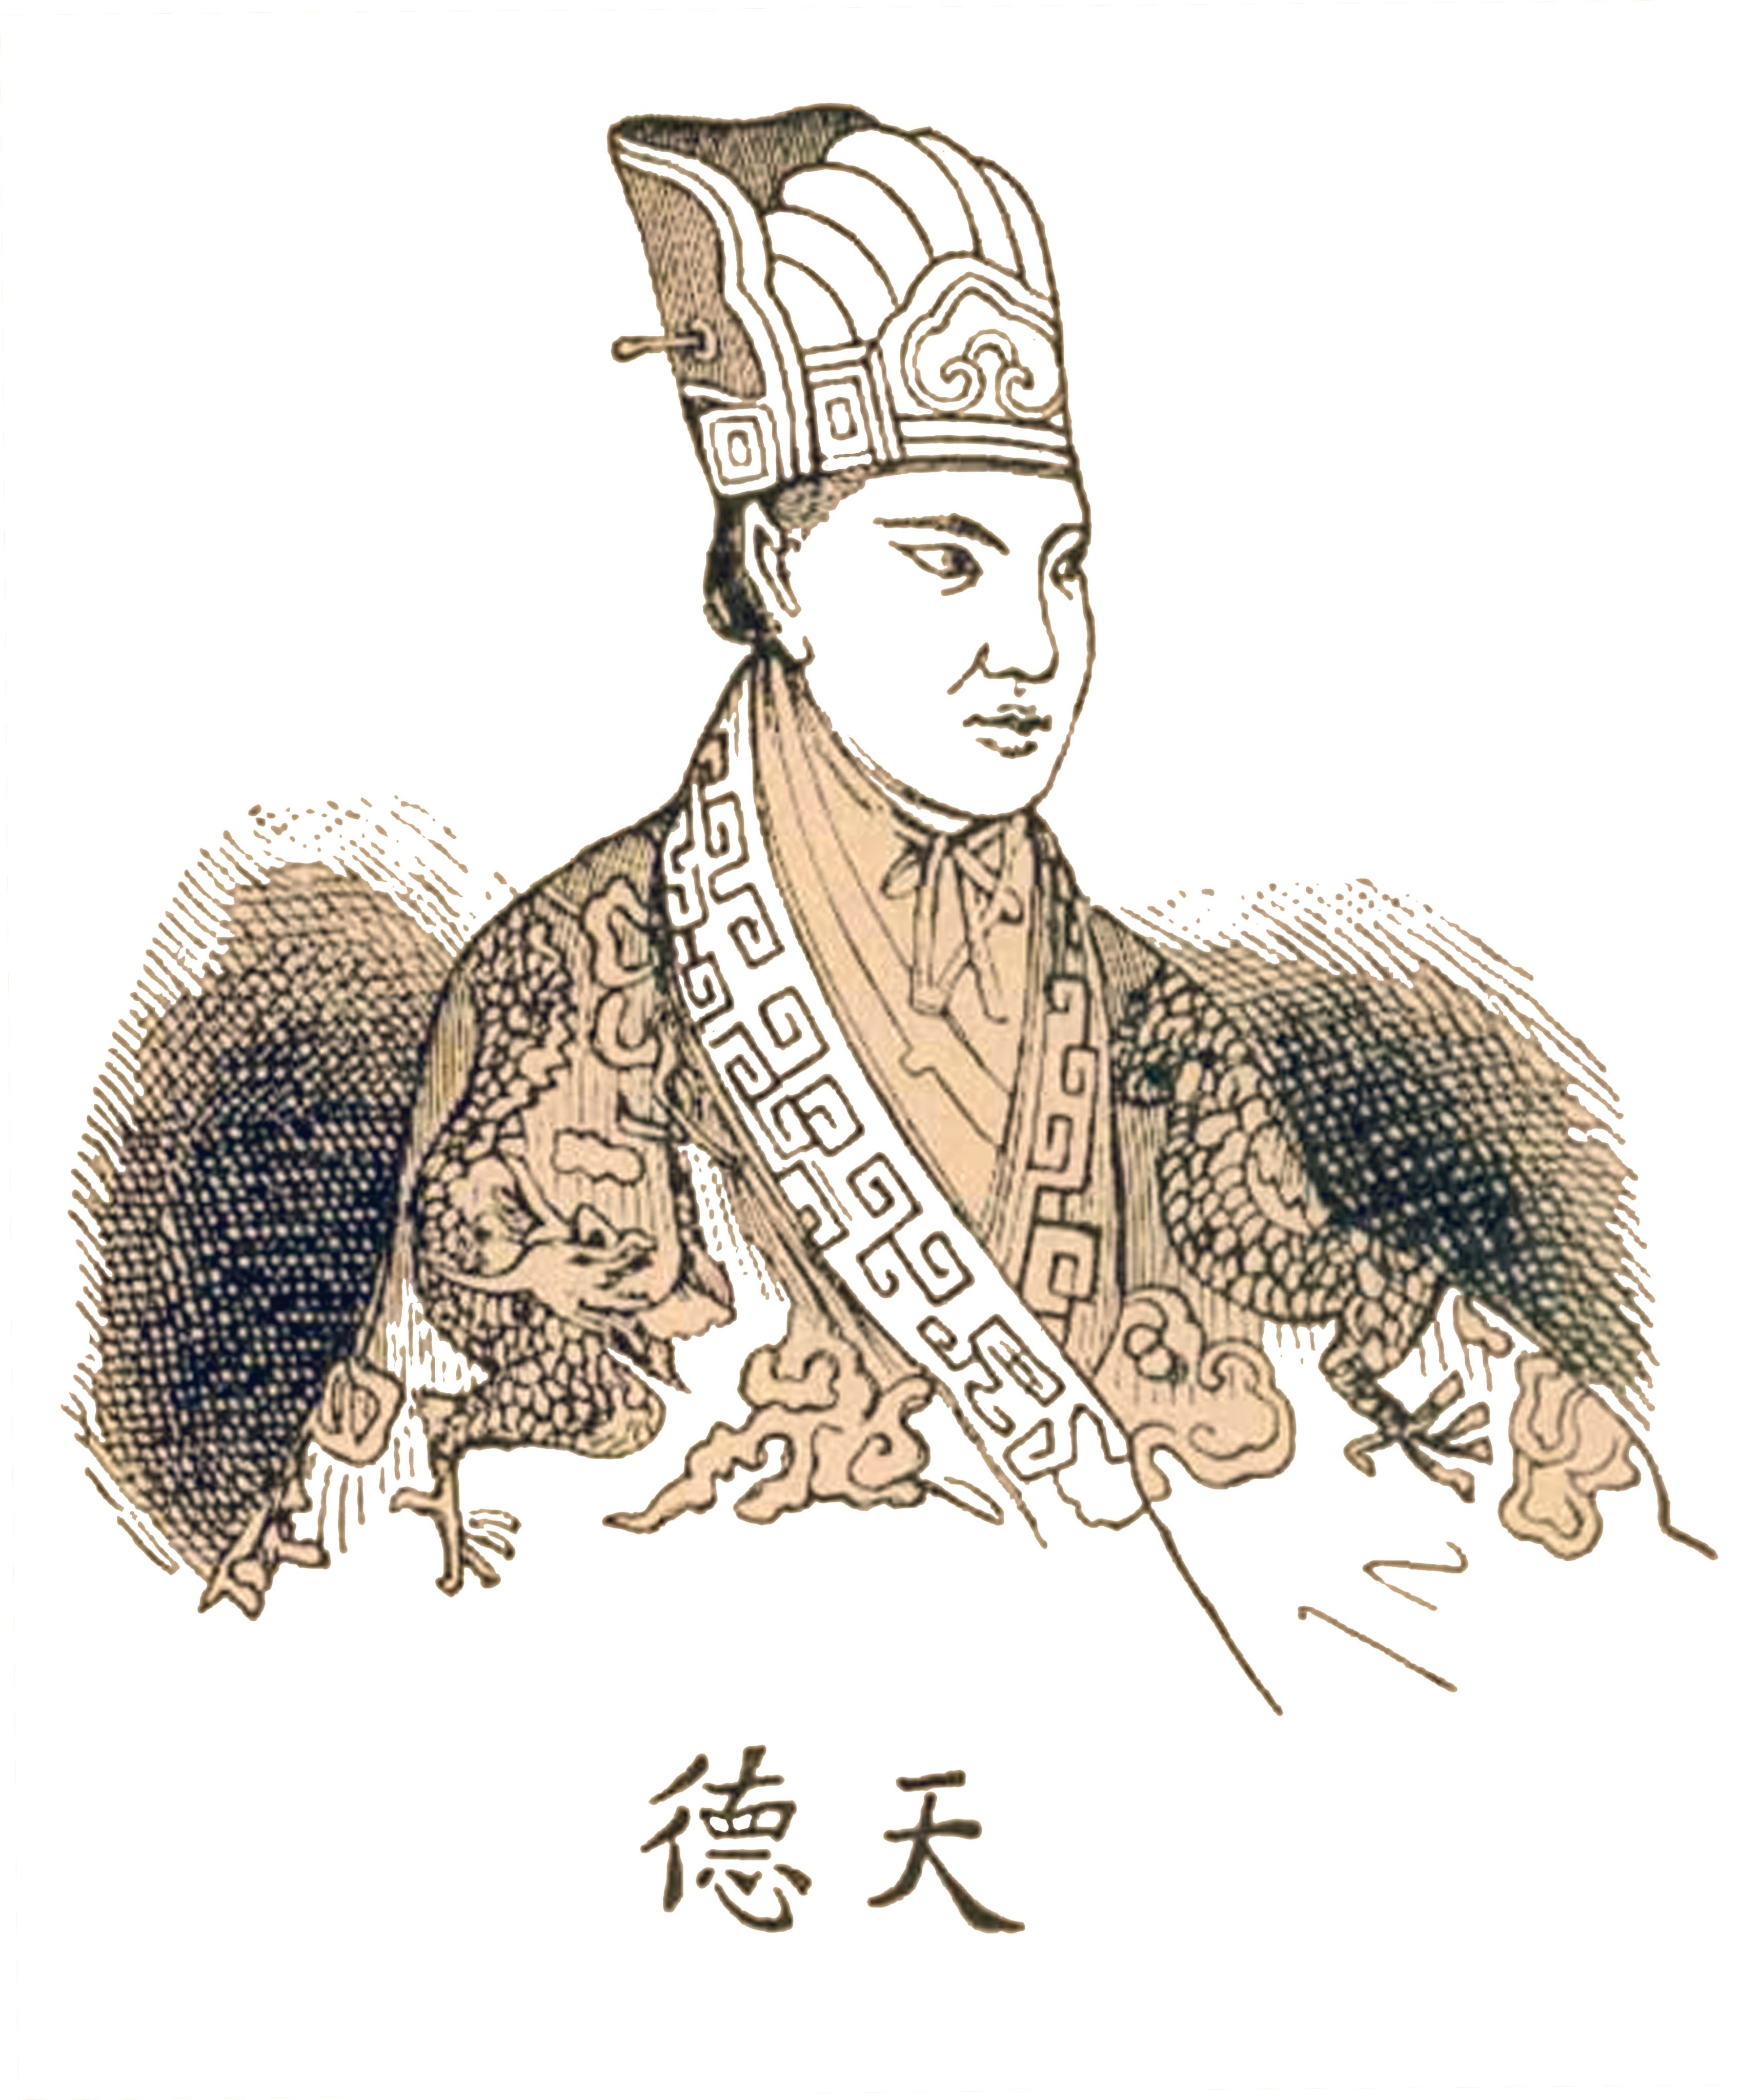 A drawing of Hong Xiuquan, a Hakka Chinese who led the Taiping Rebellion against China’s Qing dynasty. Its brutal suppression by imperial troops left 20 to 30 million people dead. Photo: Getty Images